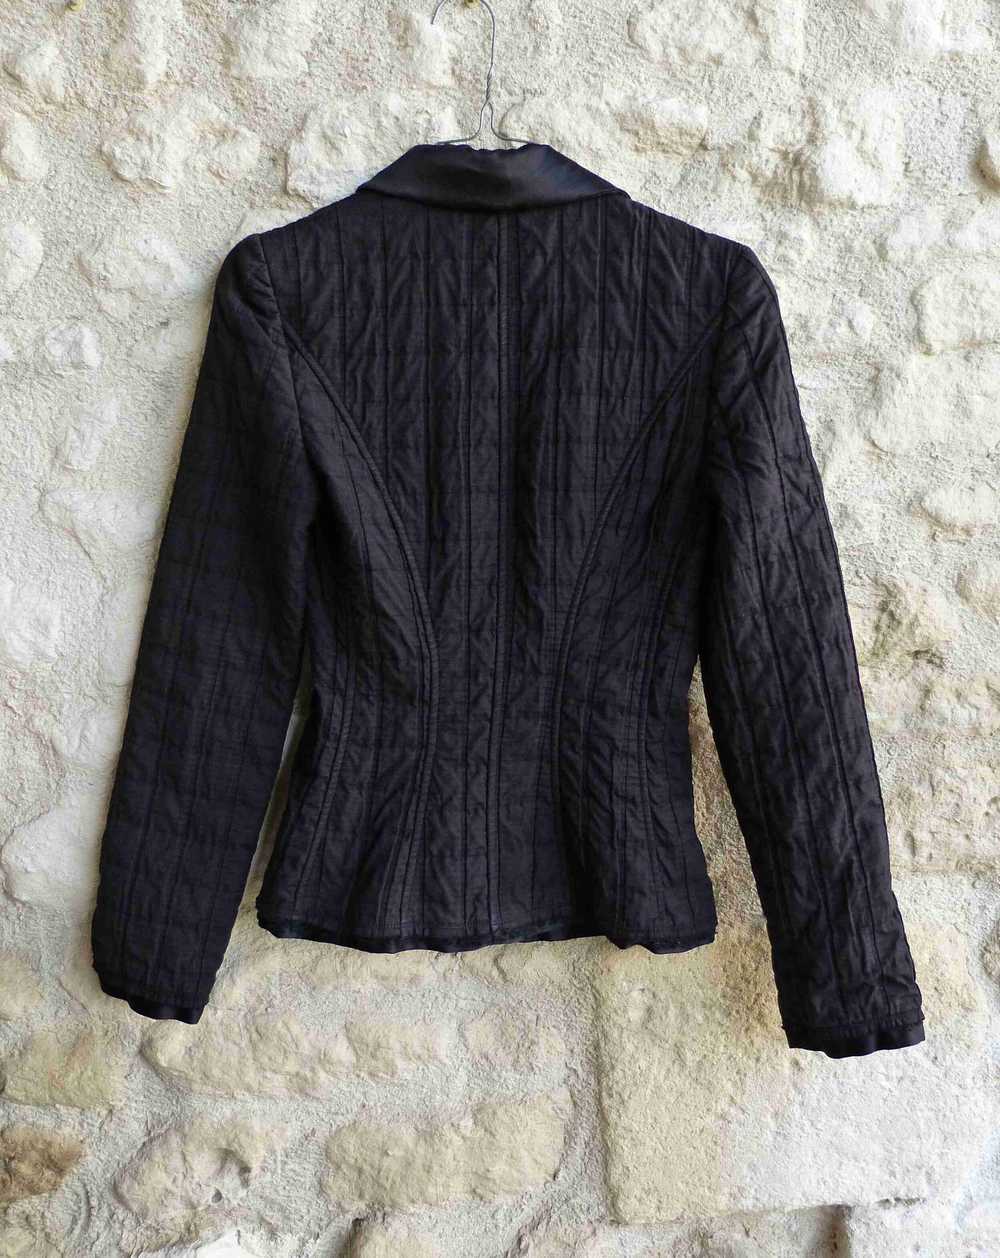 Christian Lacroix quilted blazer - quilted jacket… - image 2